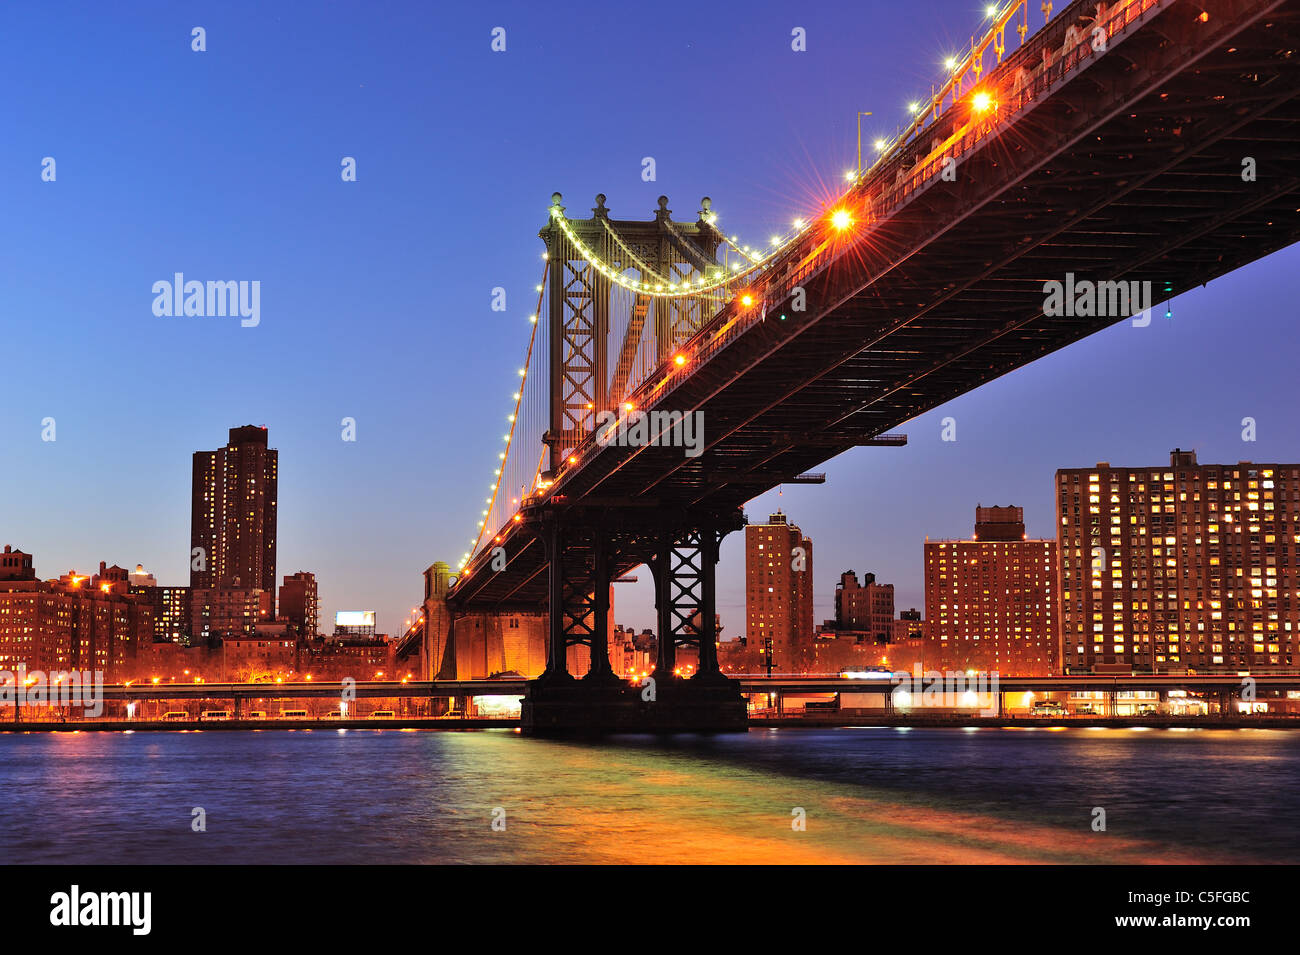 New York City Manhattan Bridge over East River at dusk illuminated with light with reflections and downtown skyline Stock Photo